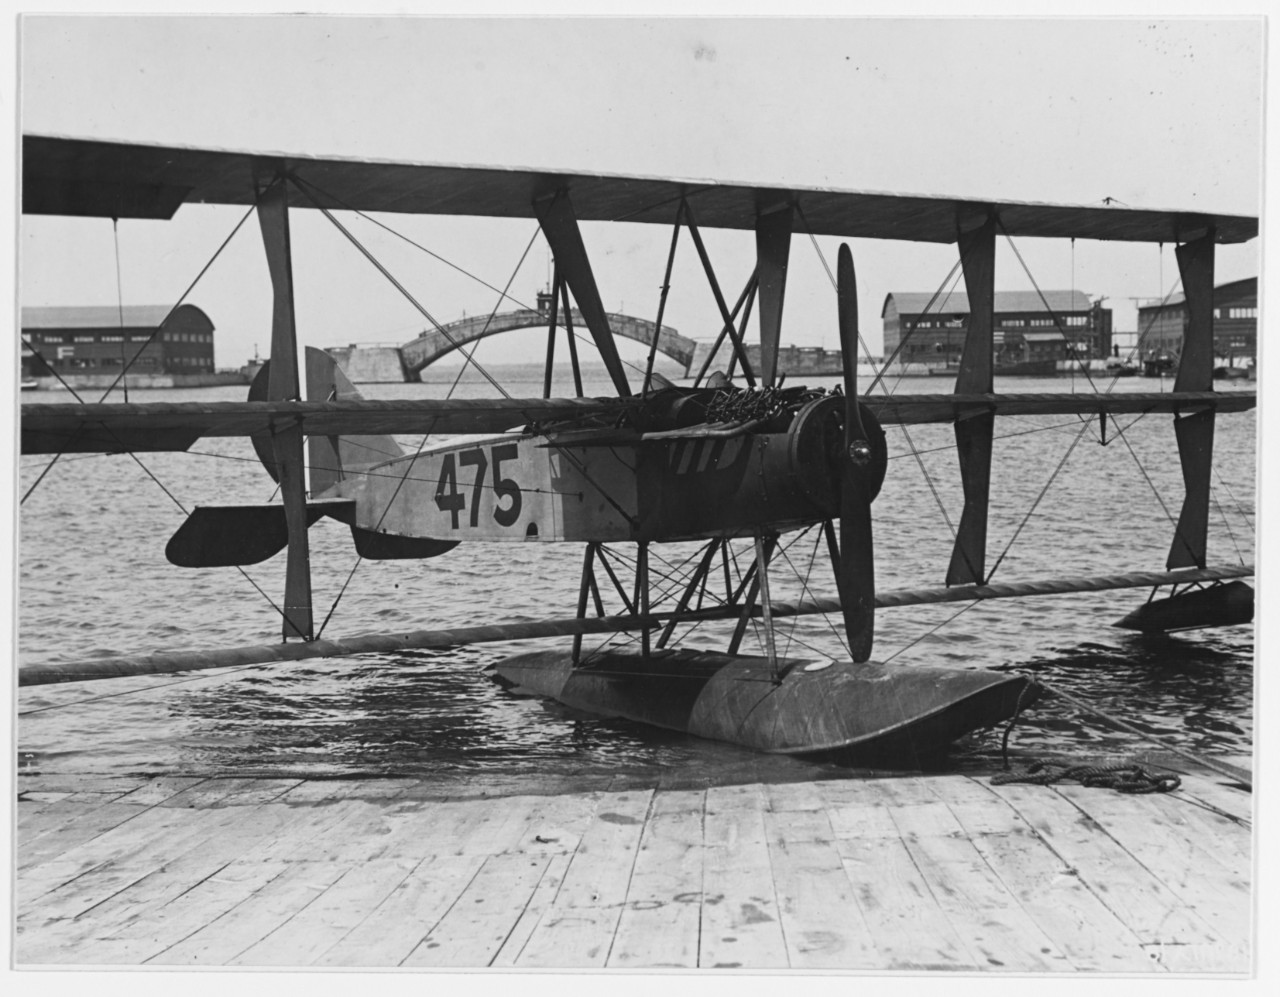 Experimental Triplane (possibly Curtiss "L" type)